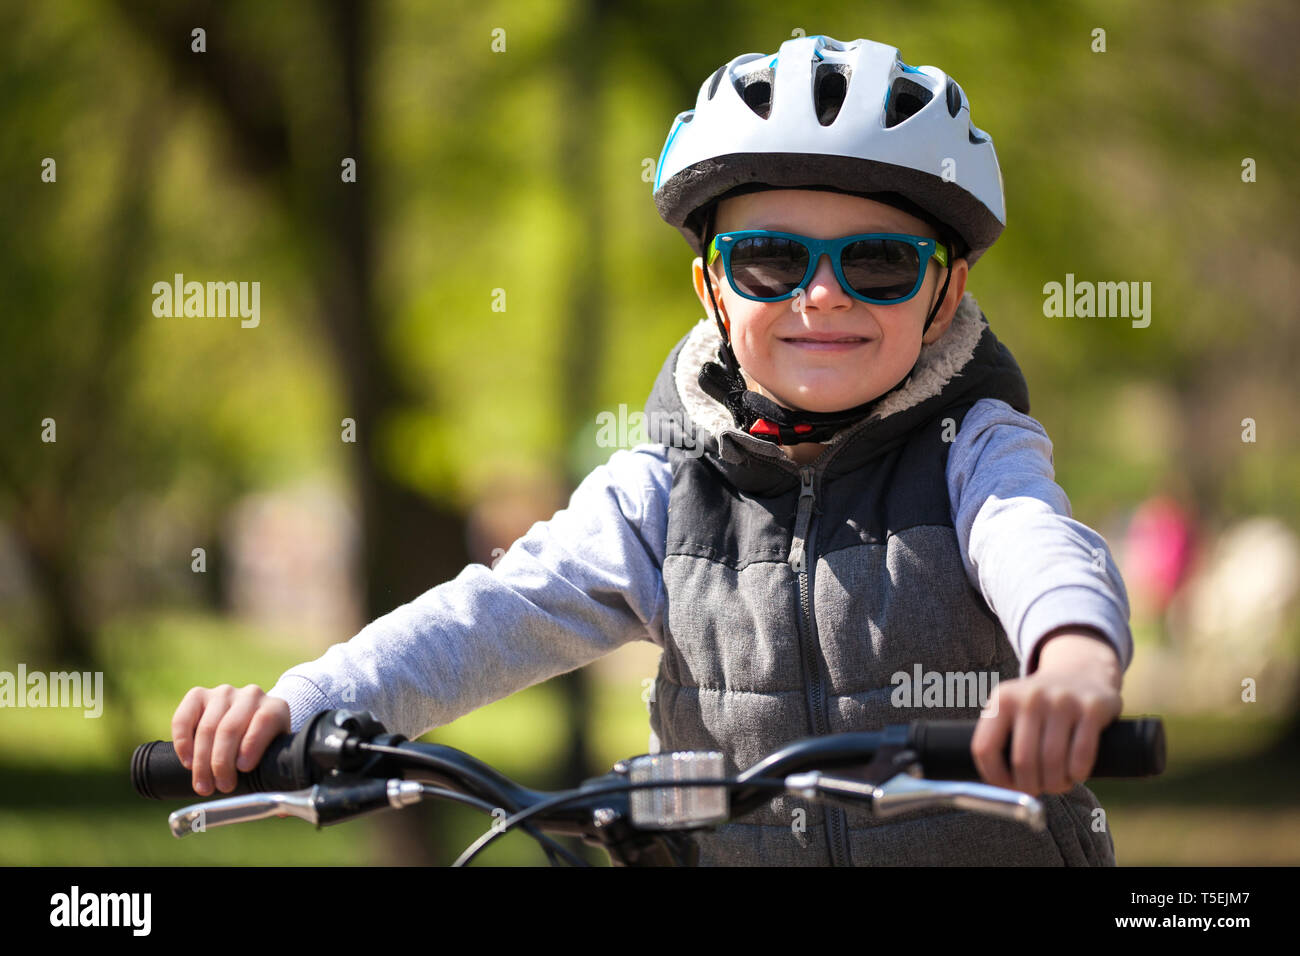 Little boy learns to ride a bike in the park. Cute boy in sunglasses rides  a bike. Happy smiling child in helmet riding a cycling Stock Photo - Alamy